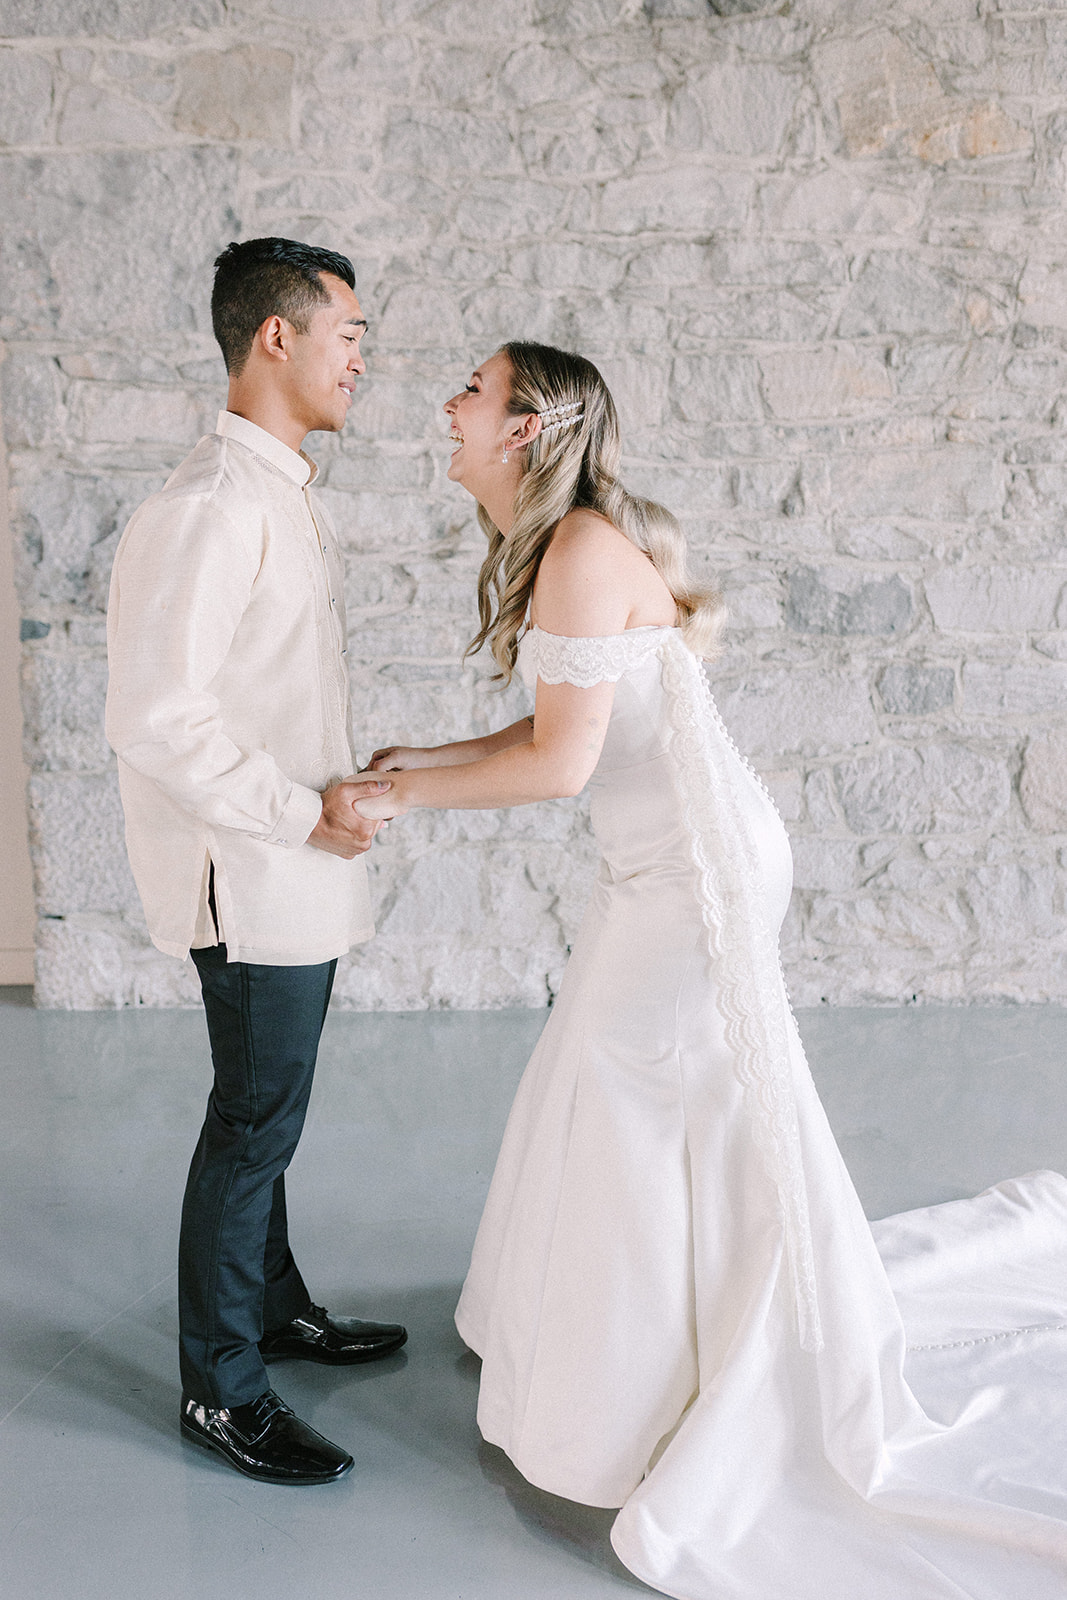 Young couple has a private moment for their first look wedding photos in Montreal